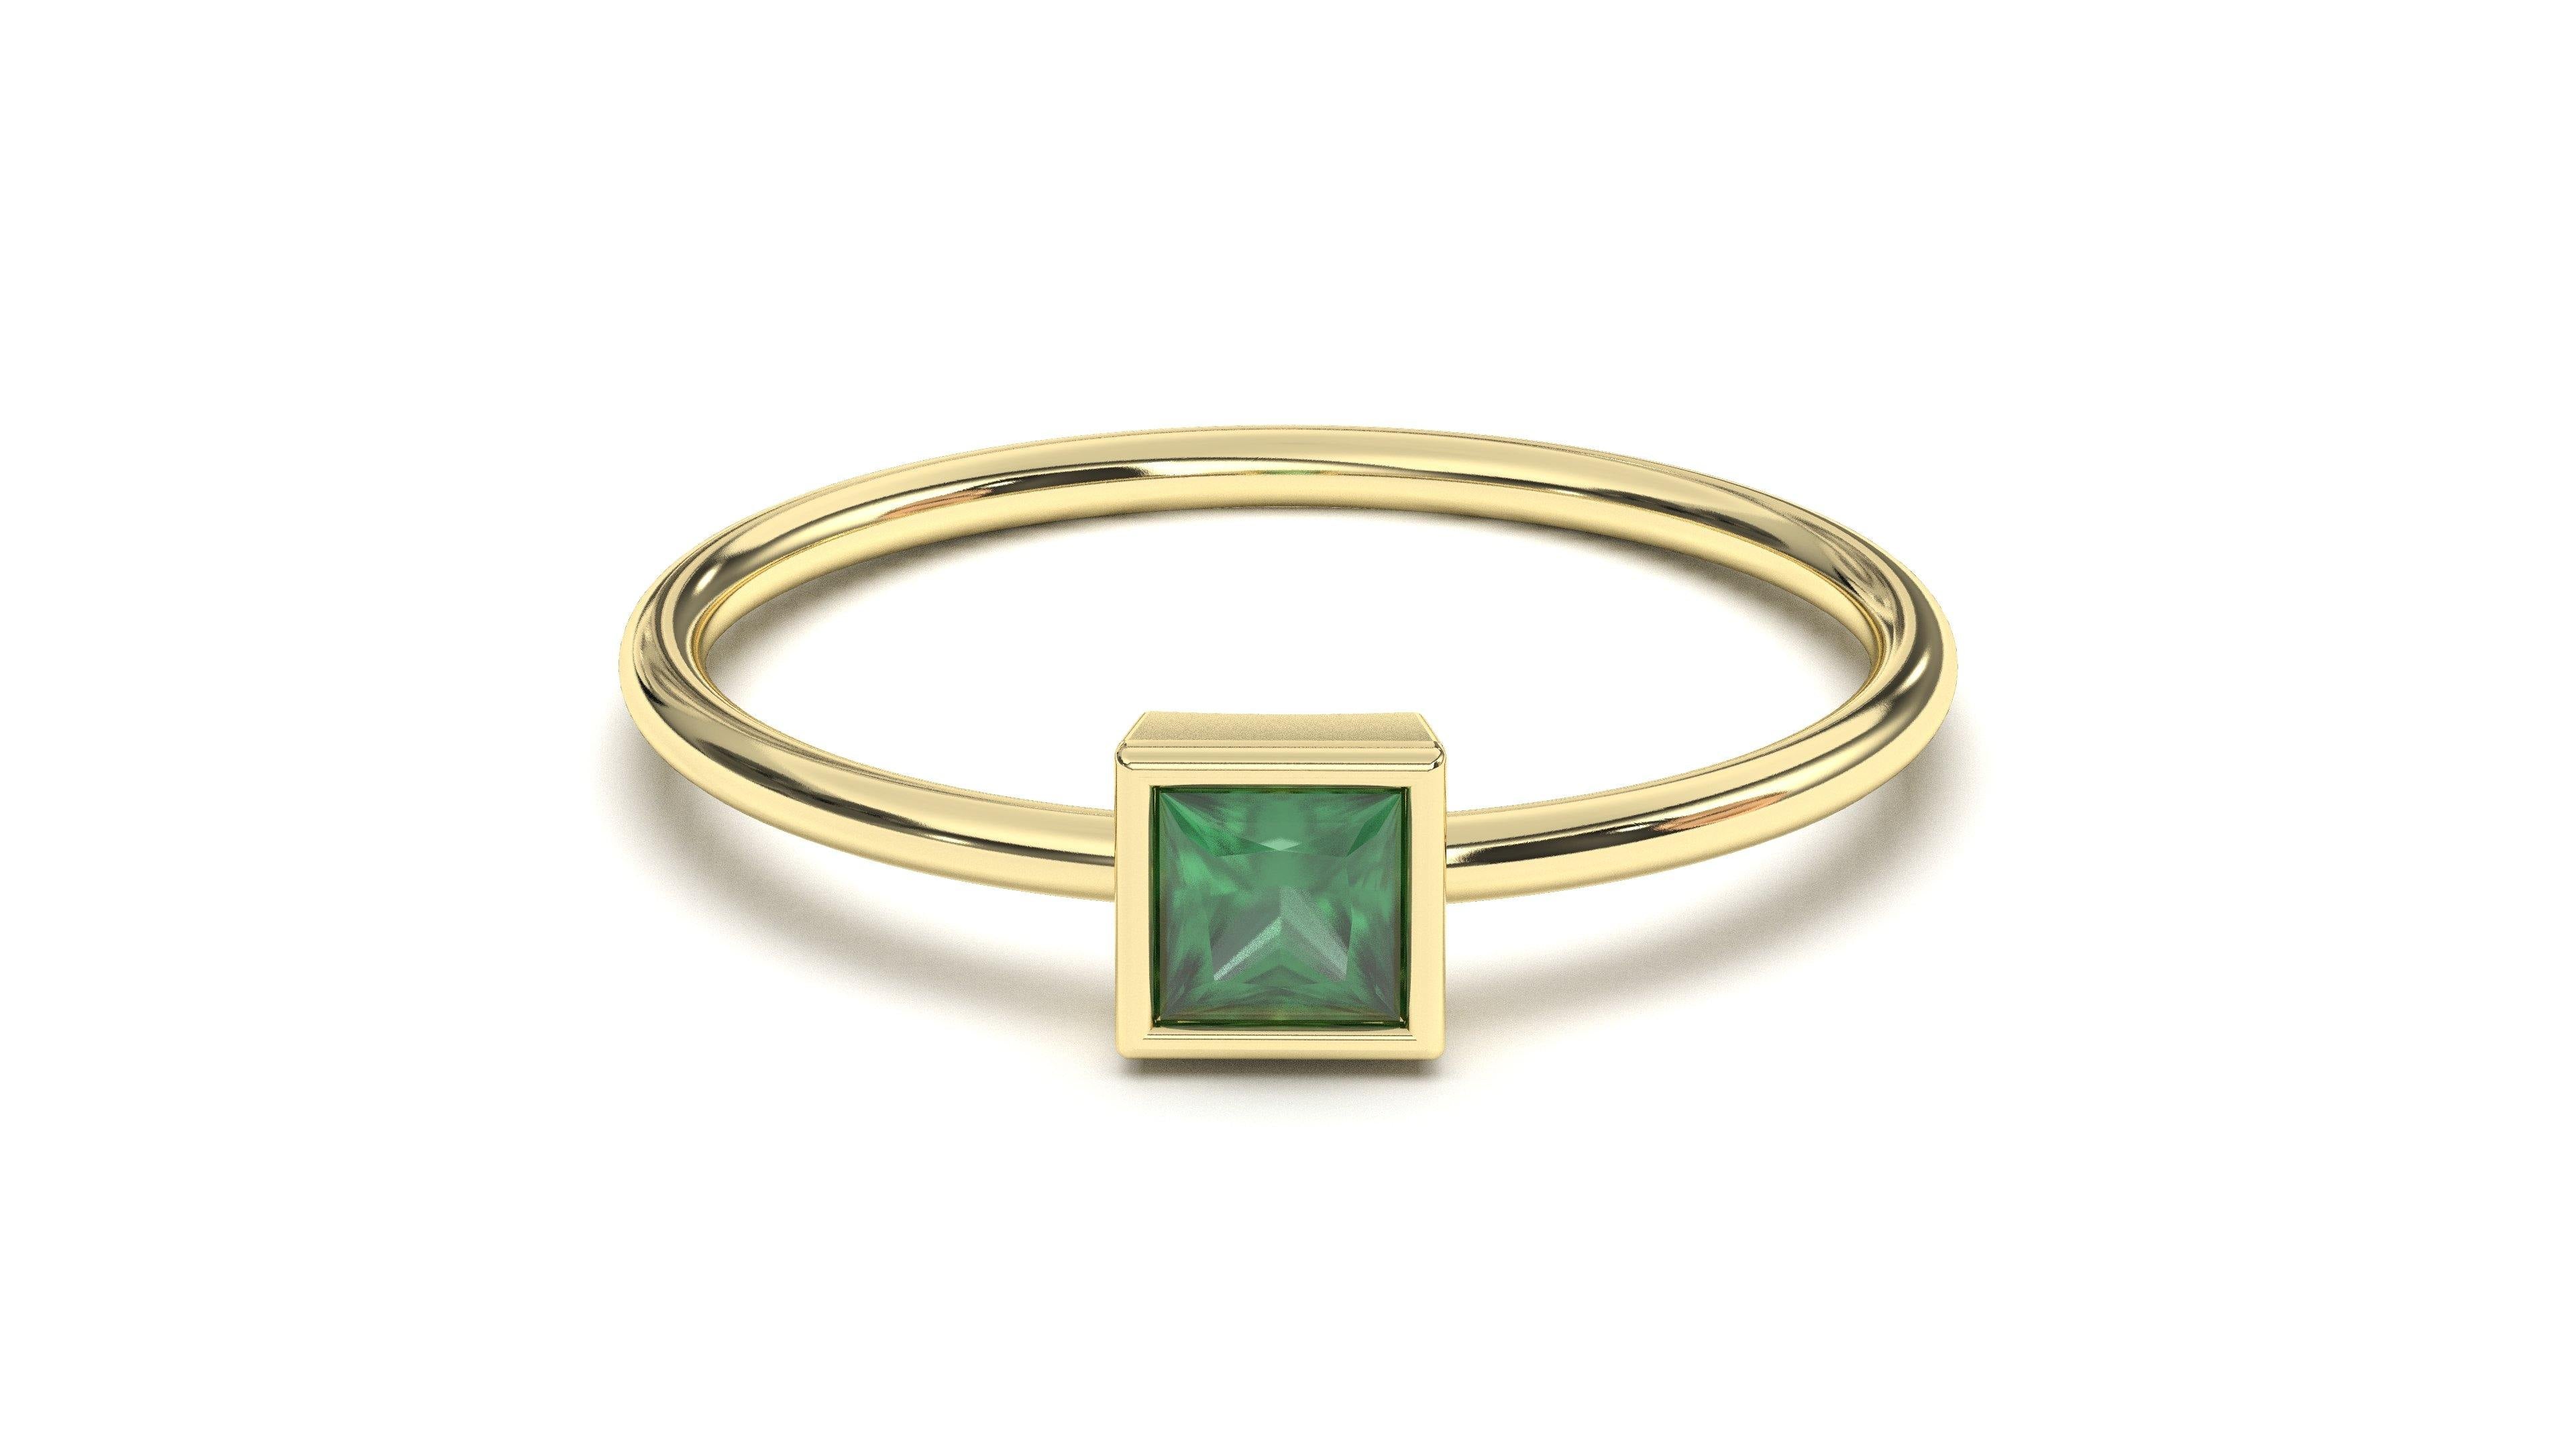 Pendant with Single Square Emerald in Bezel Setting | Classic Elements ...